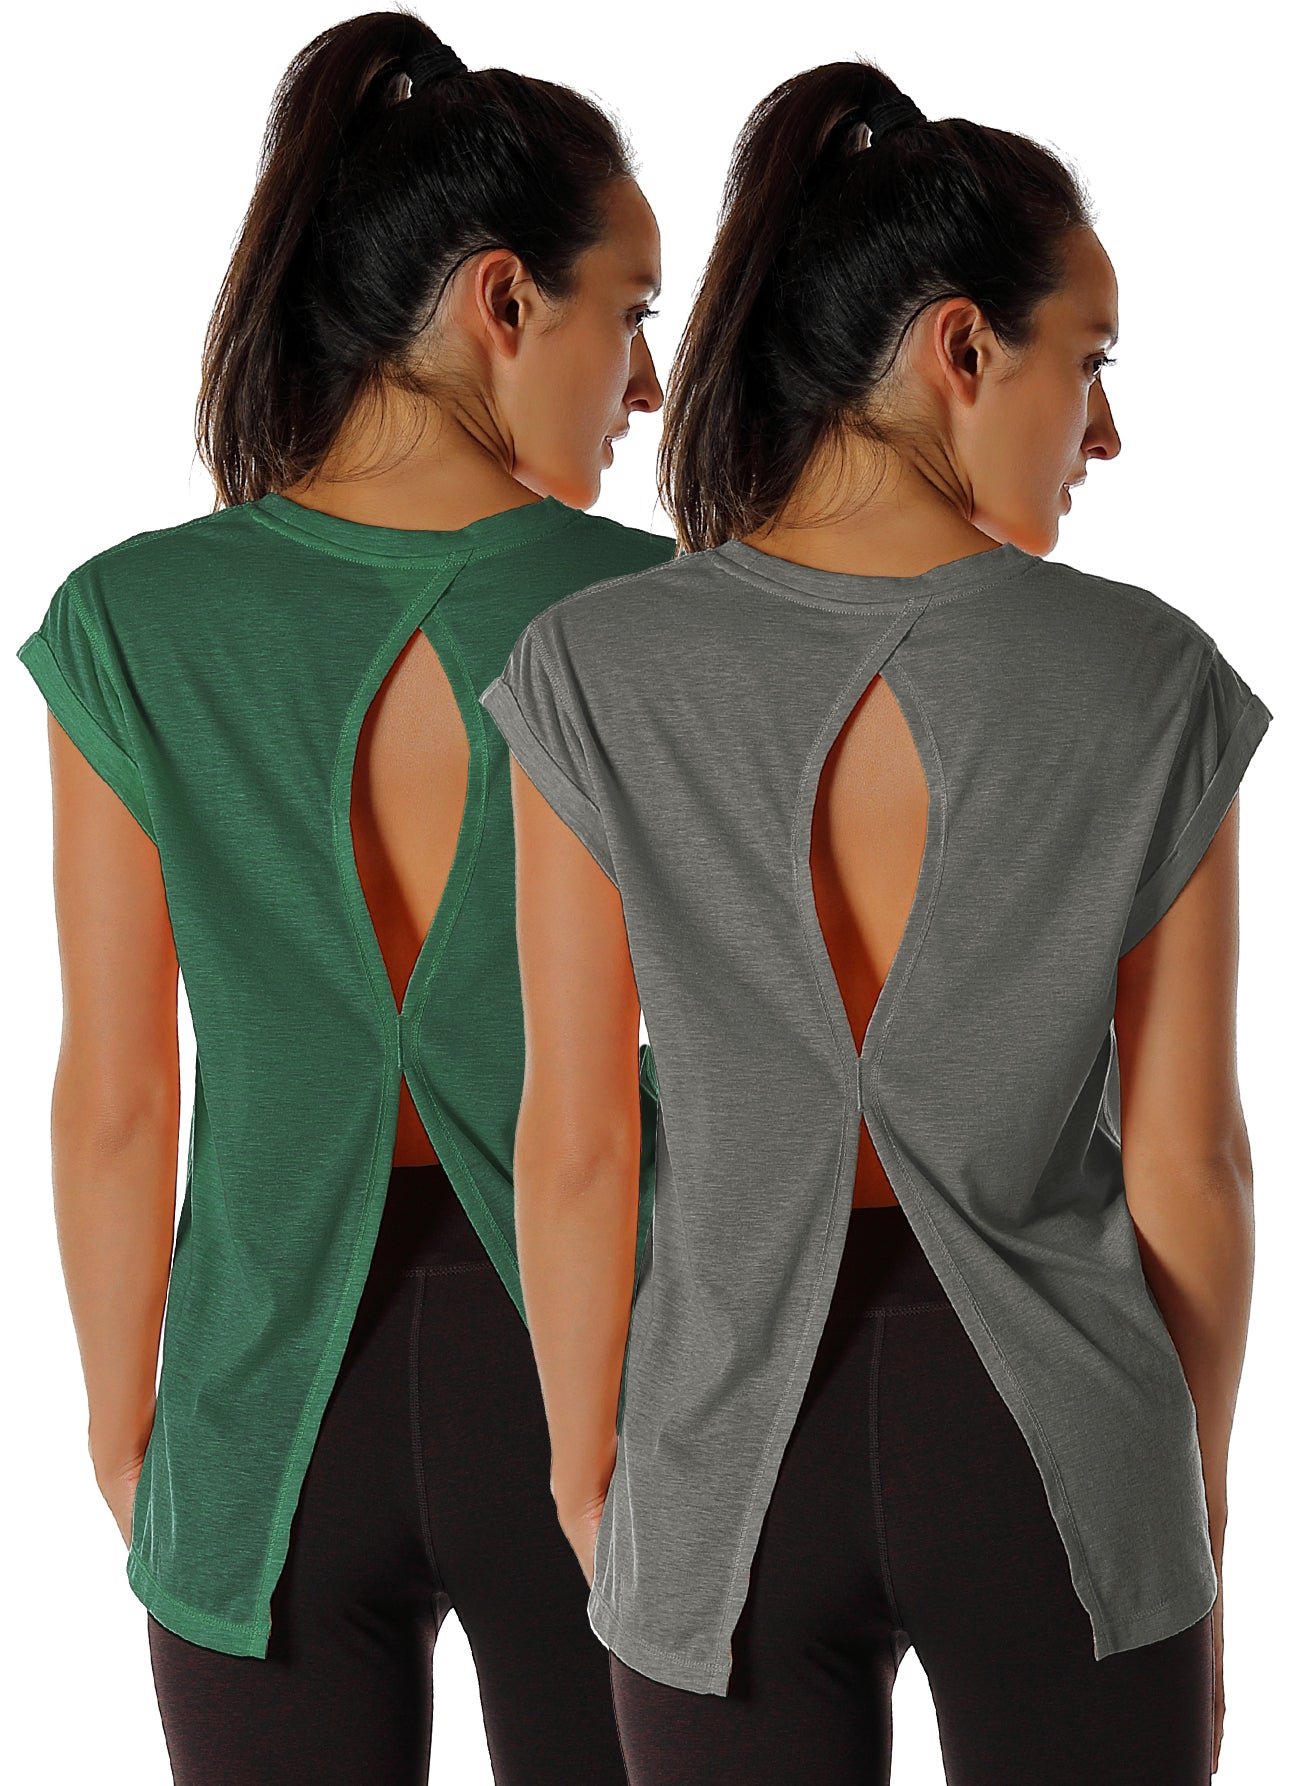  OZICERD Backless Workout Tops for Women Long Sleeve Gym Shirts  Open Back Crop Top Cute Going Out Tops Yoga Athletic Tops Twist XS :  Clothing, Shoes & Jewelry